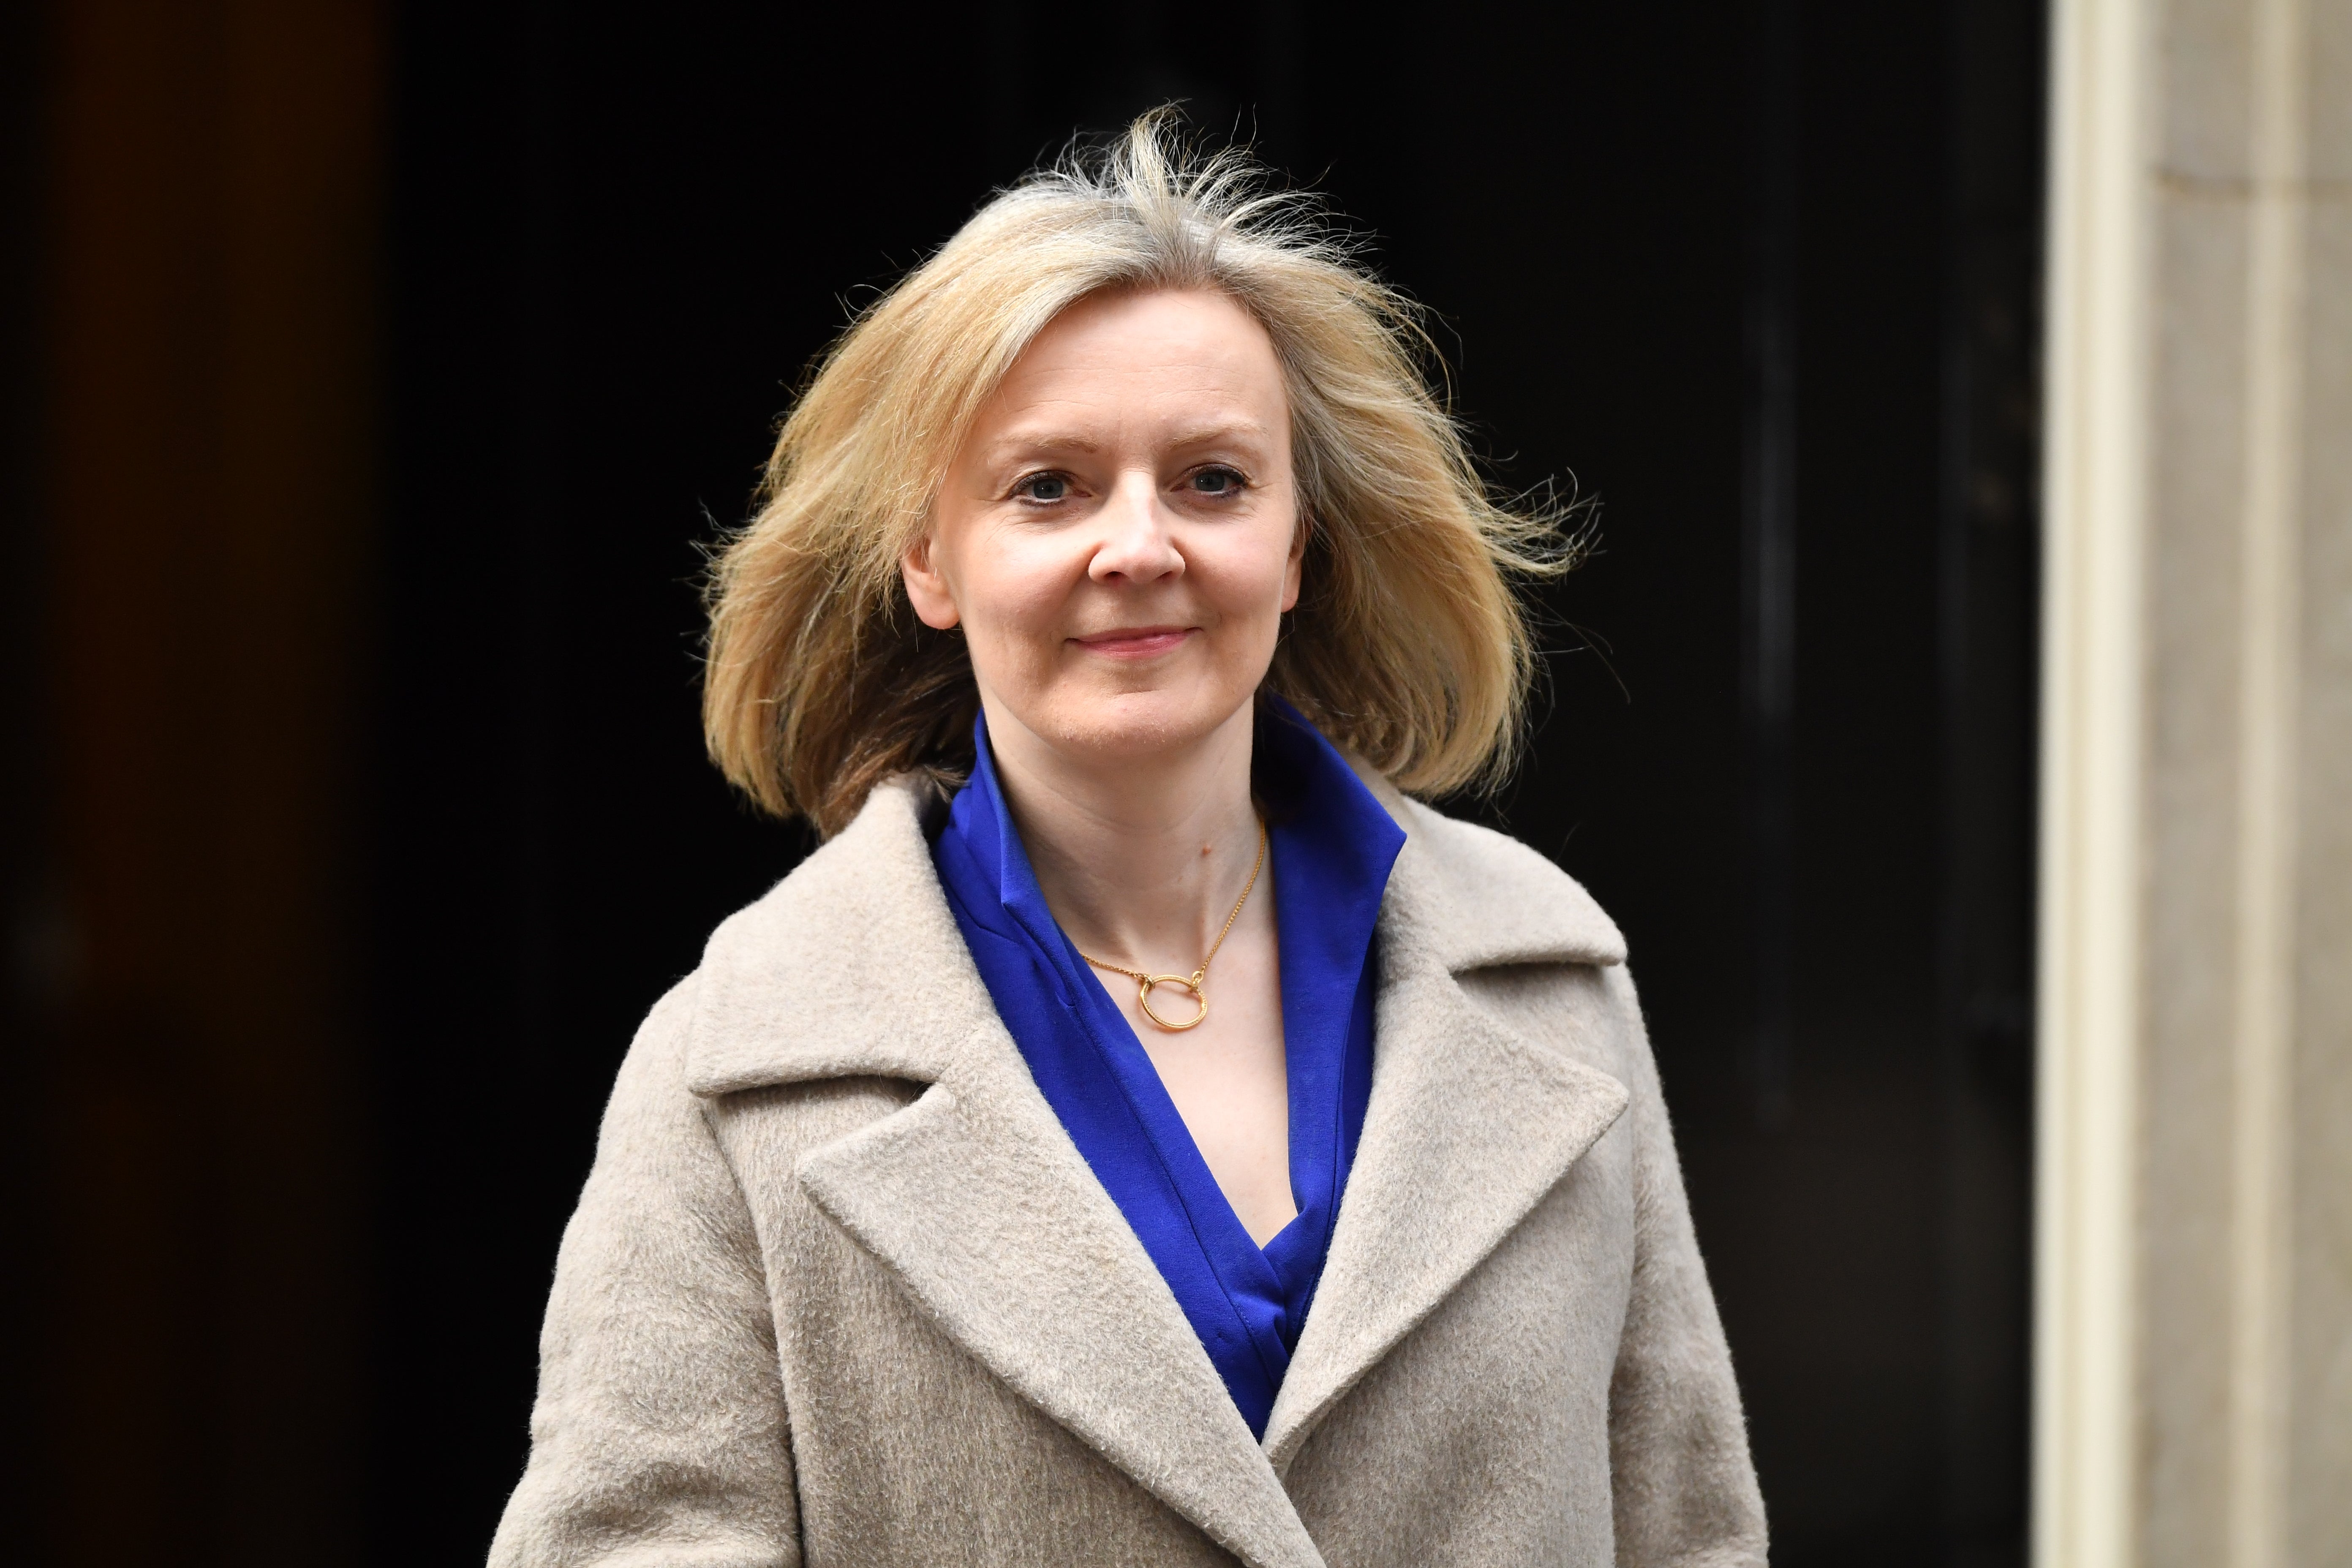 Liz Truss, the equalities minister, was criticised for her ‘ignorant’ approach along with colleague Kemi Badenoch